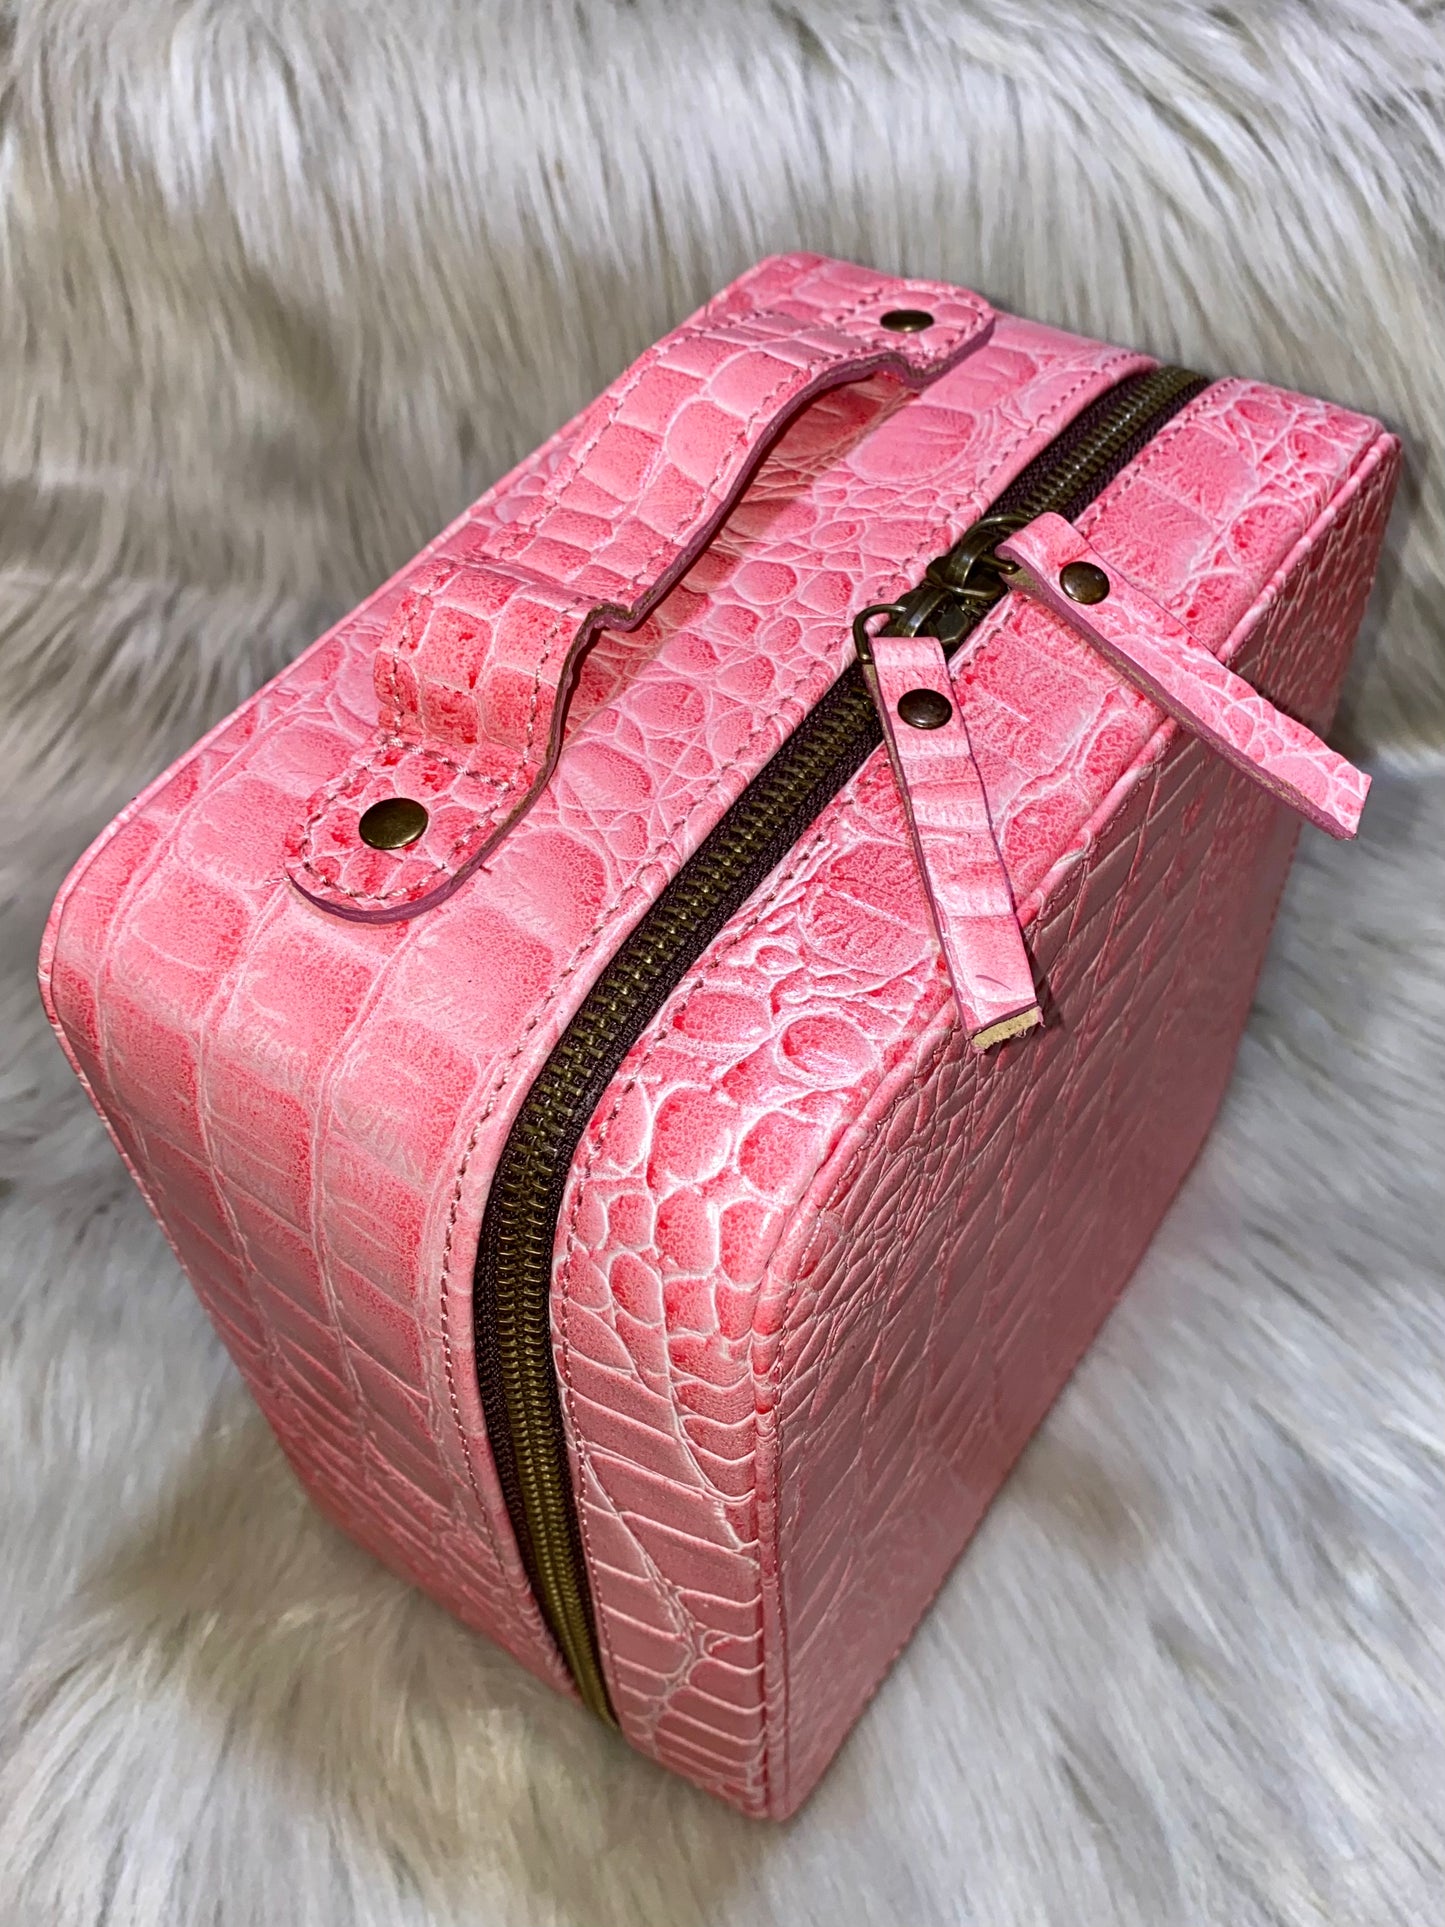 PINK CROC JEWELRY BOX - CountryFide Custom Accessories and Outdoors